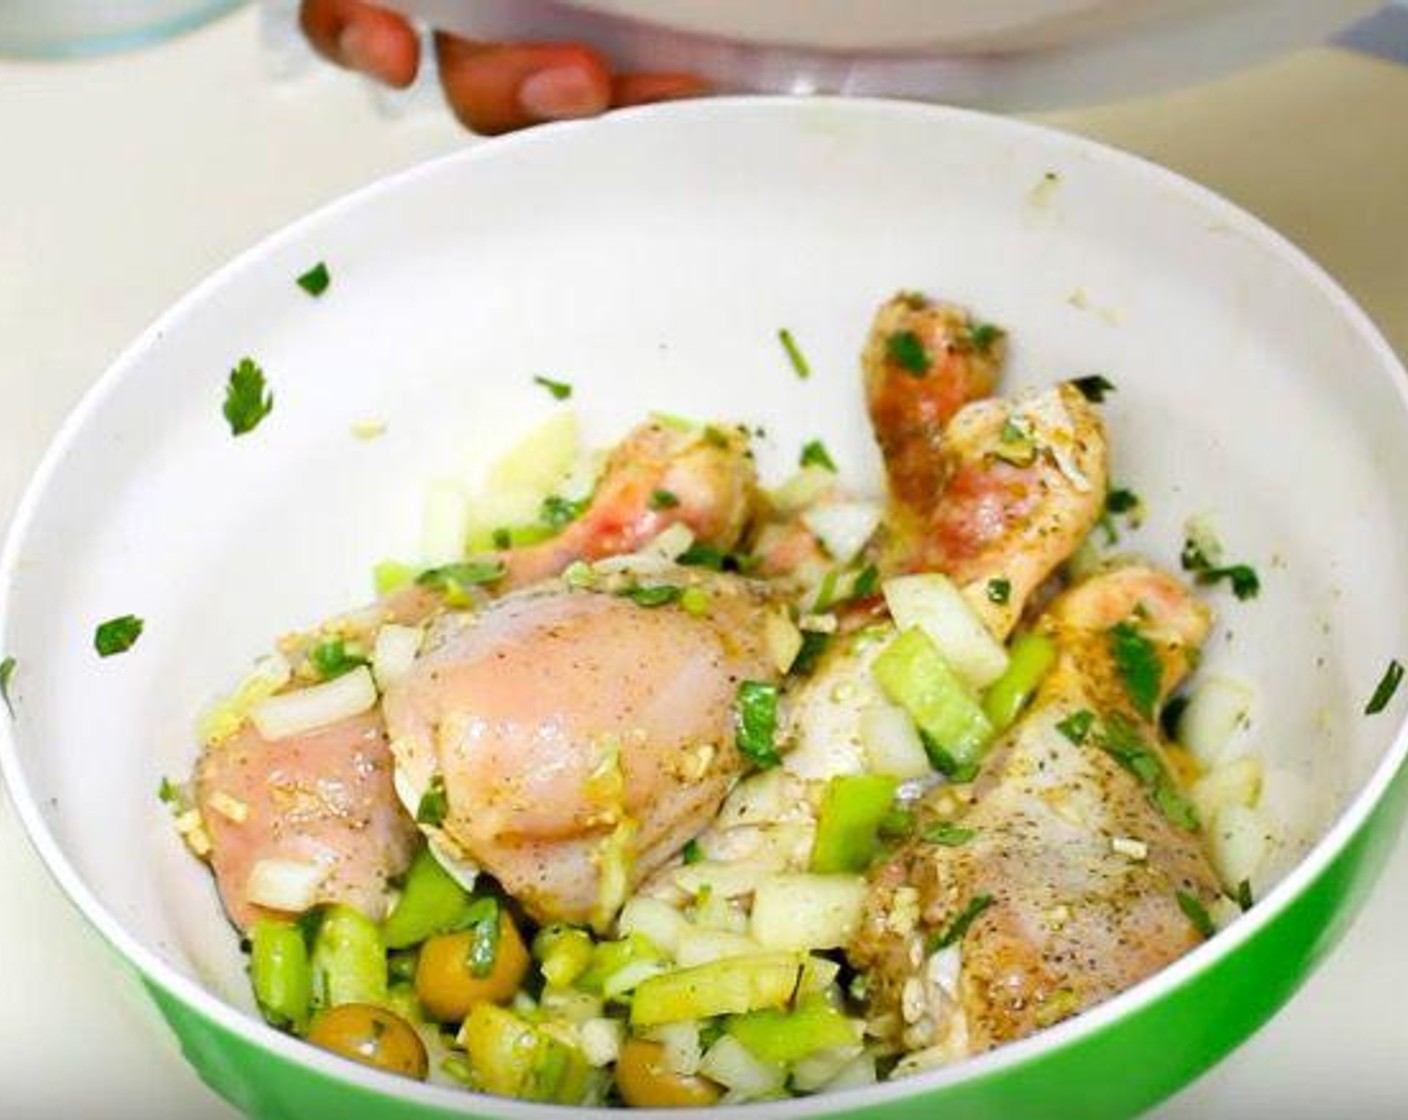 step 1 In a mixing bowl, squeeze the Lime (1) over the Chicken Drumsticks (5). Add Dried Oregano (1/2 tsp), Ground Black Pepper (1/8 tsp), Fresh Cilantro (2 1/2 Tbsp), Chicken Bouillon Powder (1 pckg), Yellow Onion (1), Garlic (3 cloves), Cubanelle Pepper (1/2), and Manzanilla Olives (1/4 cup).